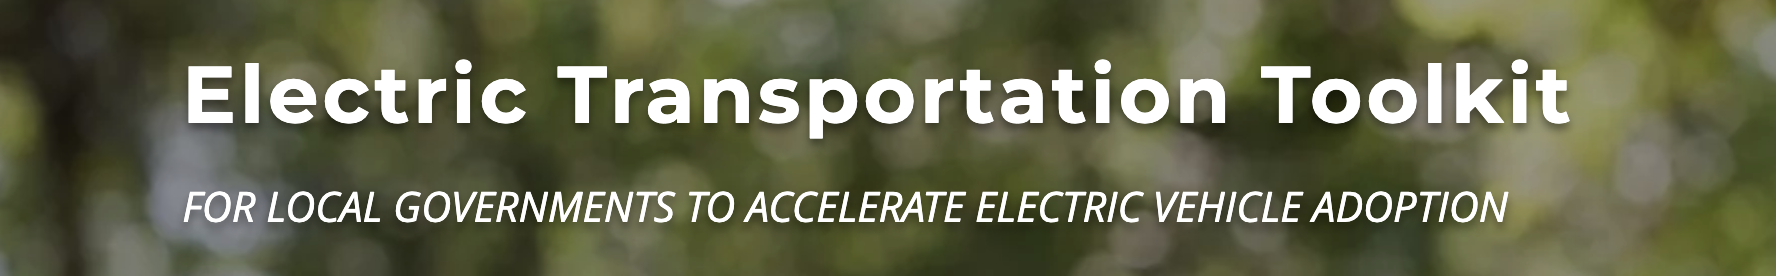 Toolkit Outlines 11 Ways for Local Governments to Accelerate Electric Transportation